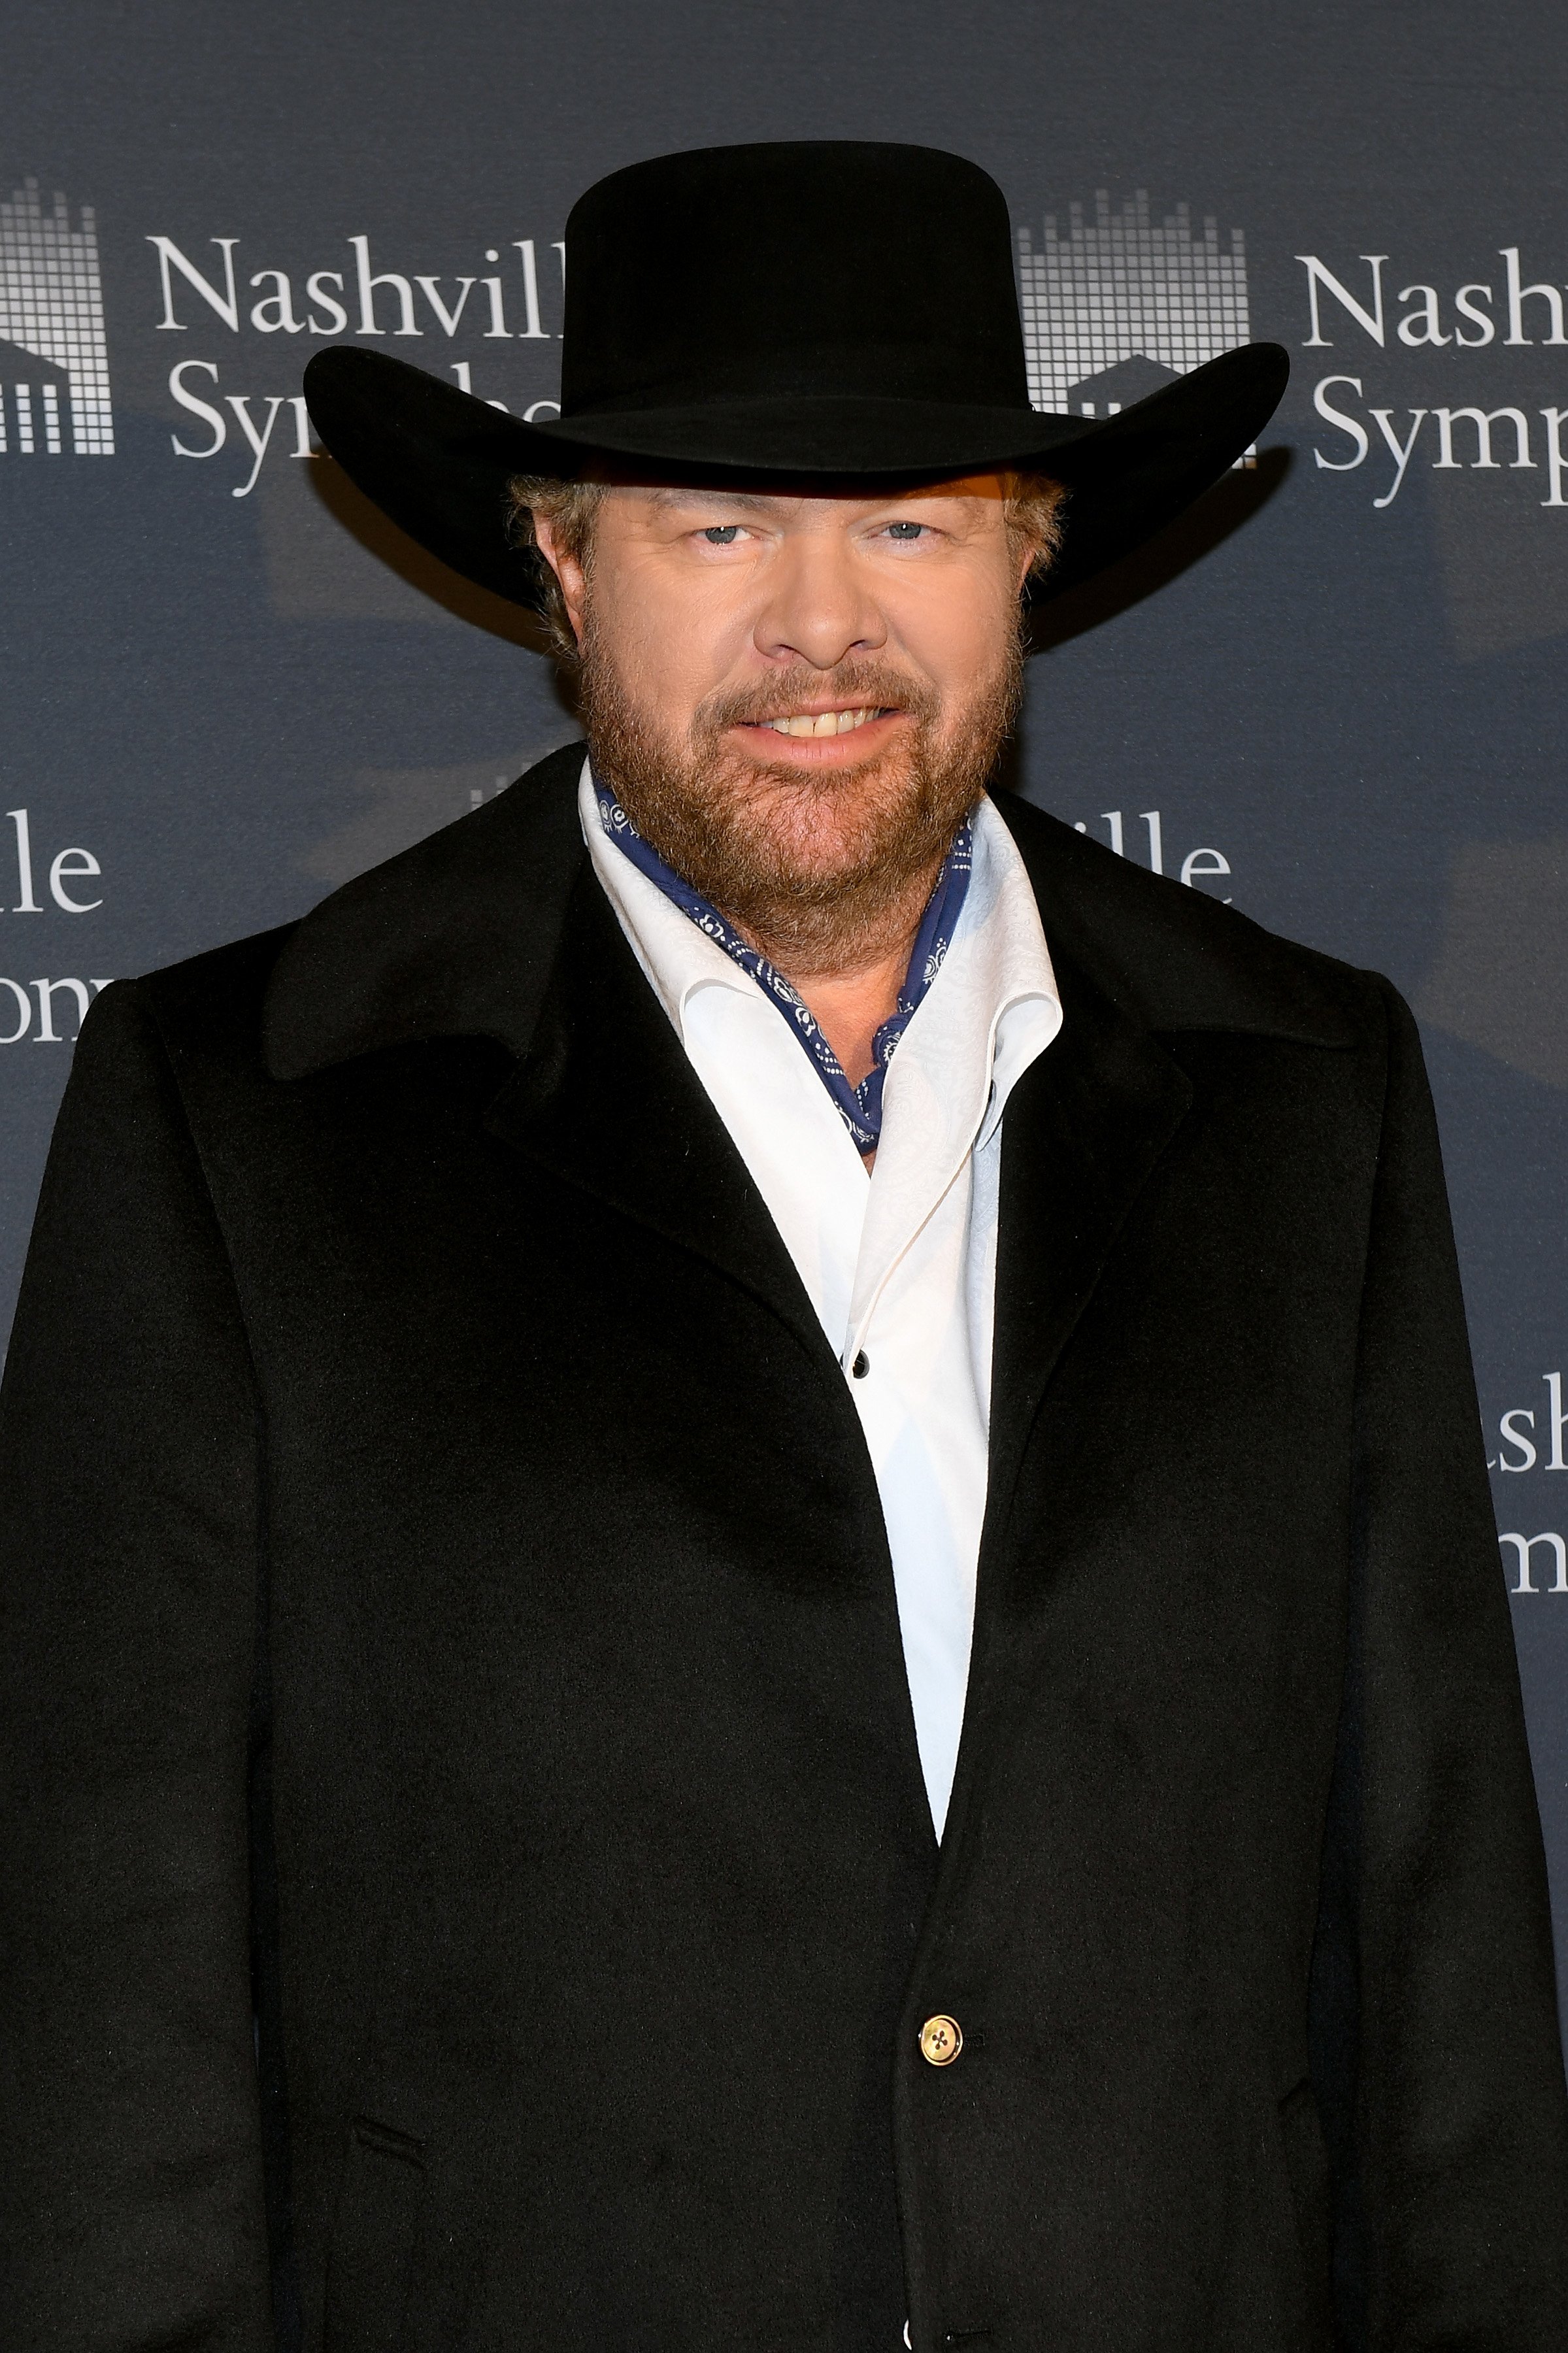 Toby Keith attends the 34th Annual Nashville Symphony Ball at Schermerhorn Symphony Center on December 8, 2018, in Nashville, Tennessee. | Source: Getty Images